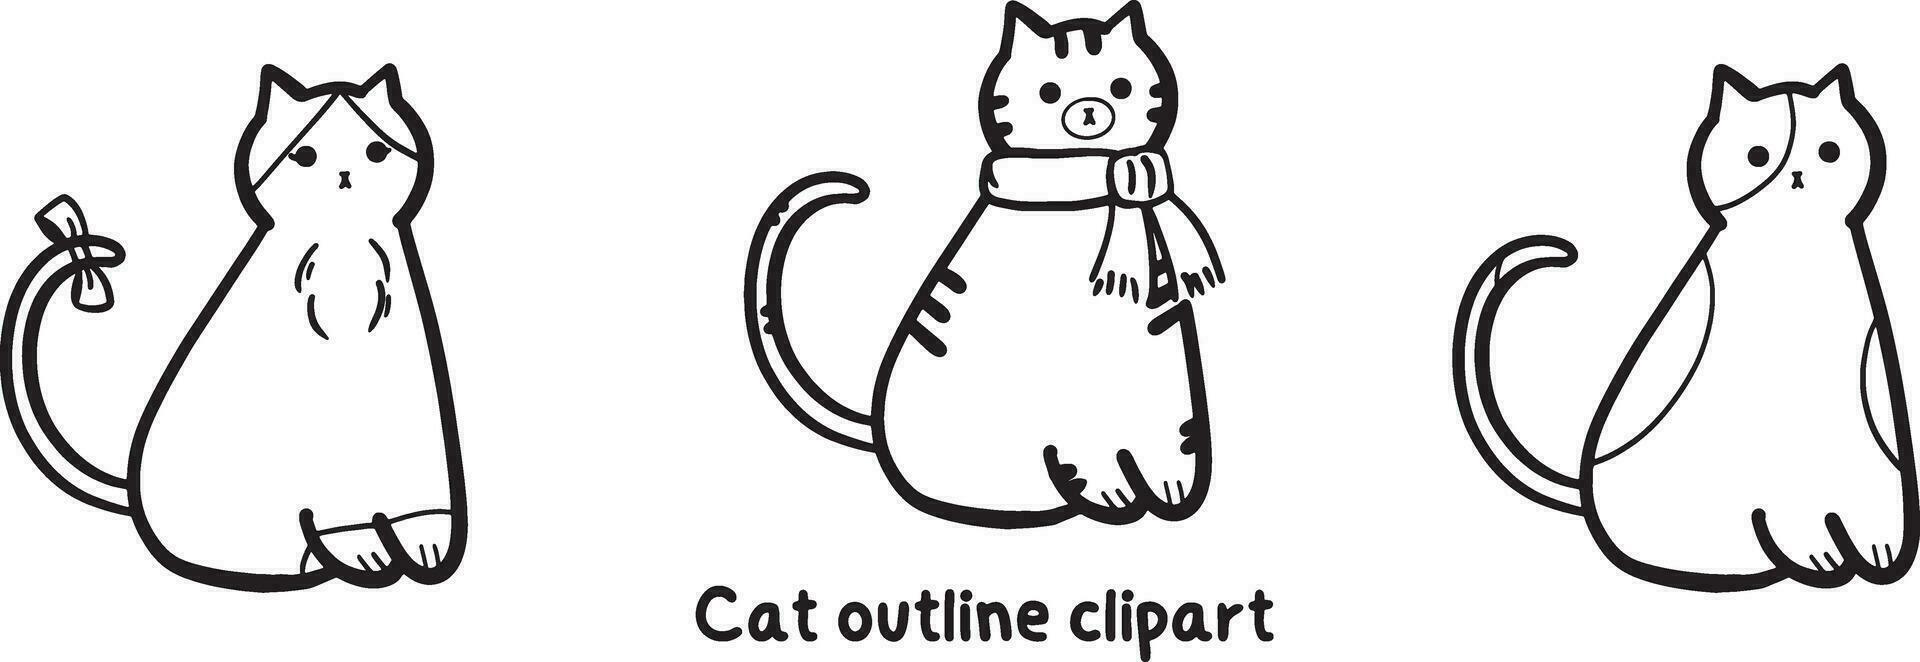 Set of cat outline clipart vector